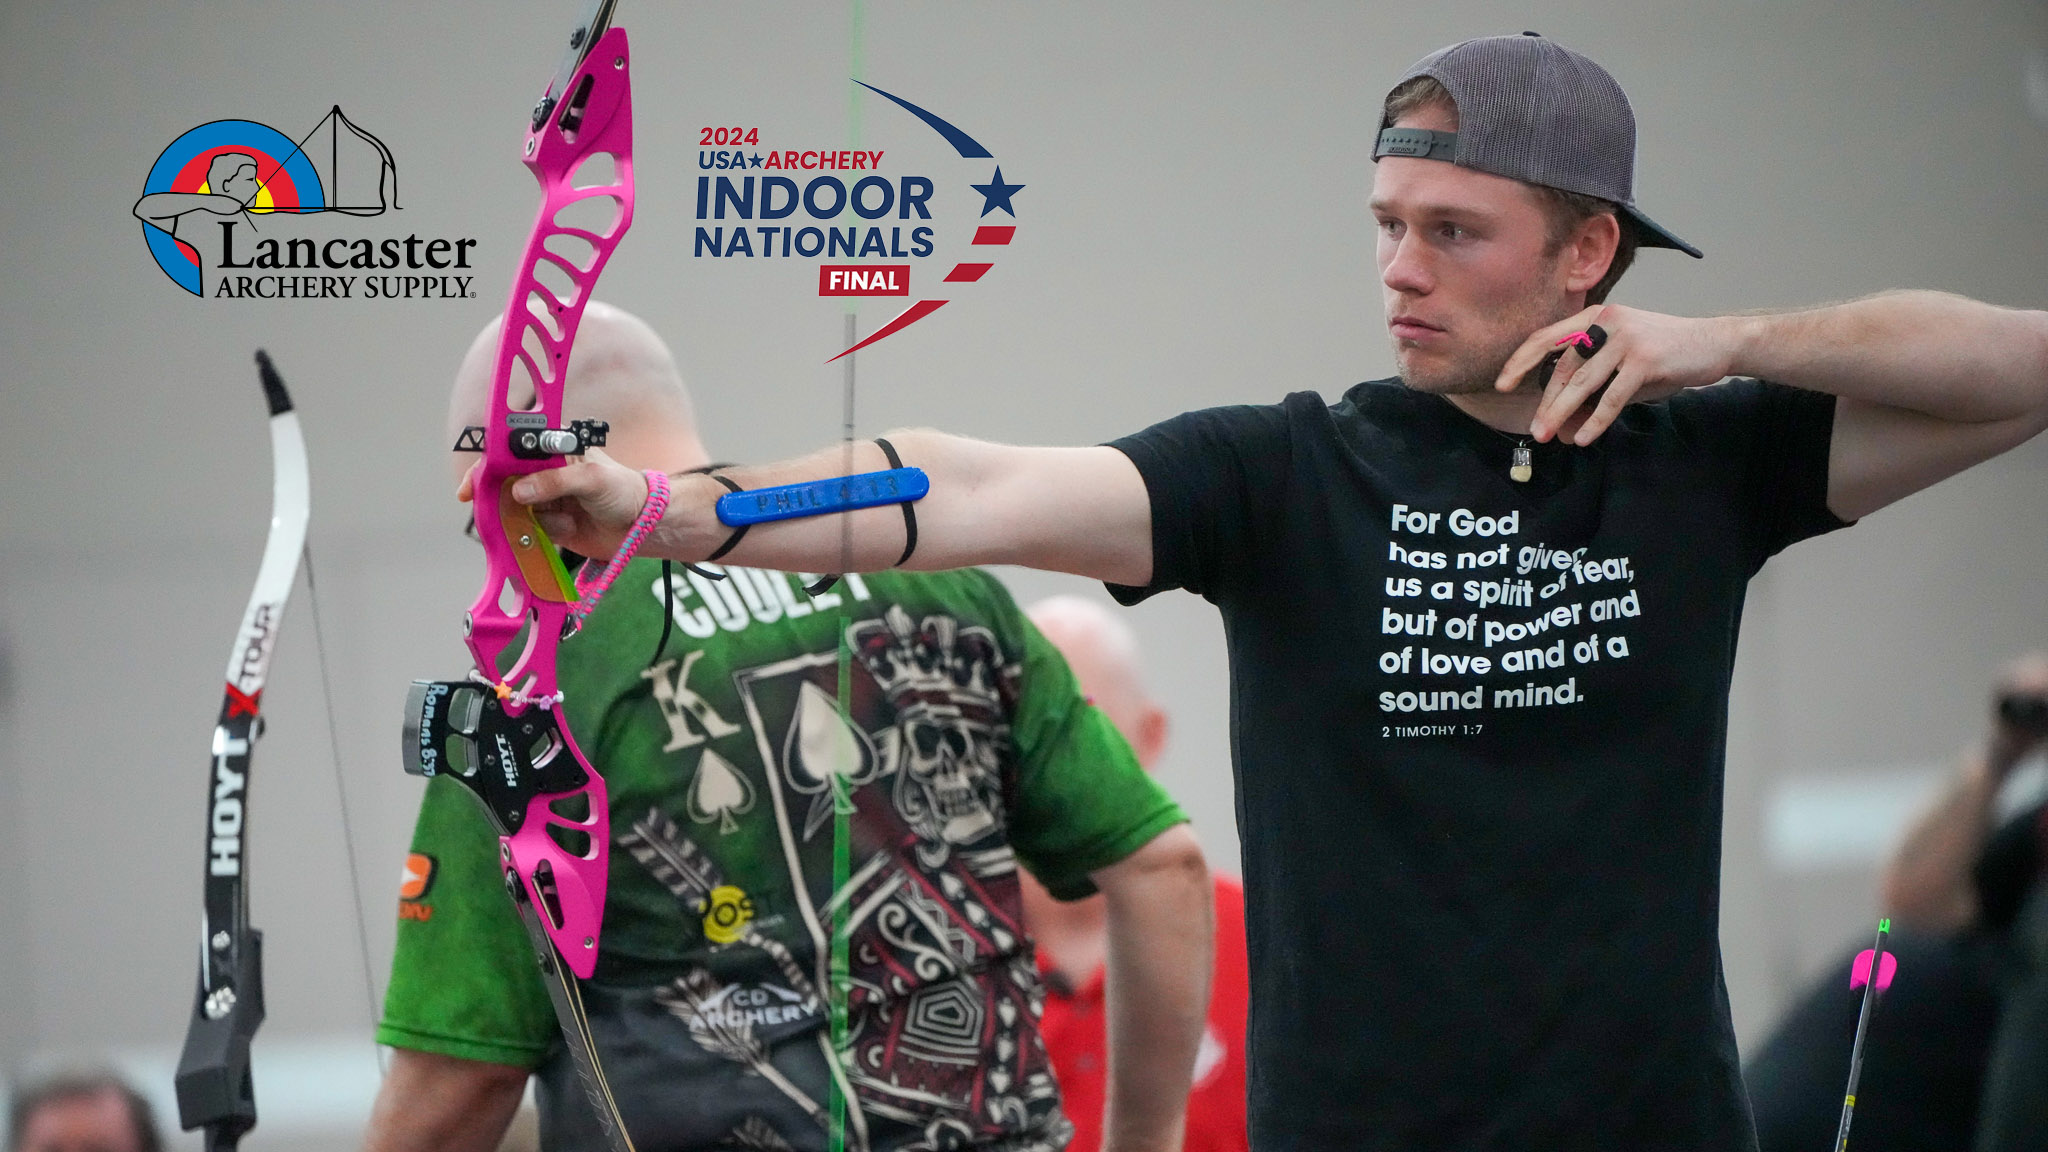 Lancaster Archery Supply backs barebow at the 2024 USA Archery Indoor  Nationals Final